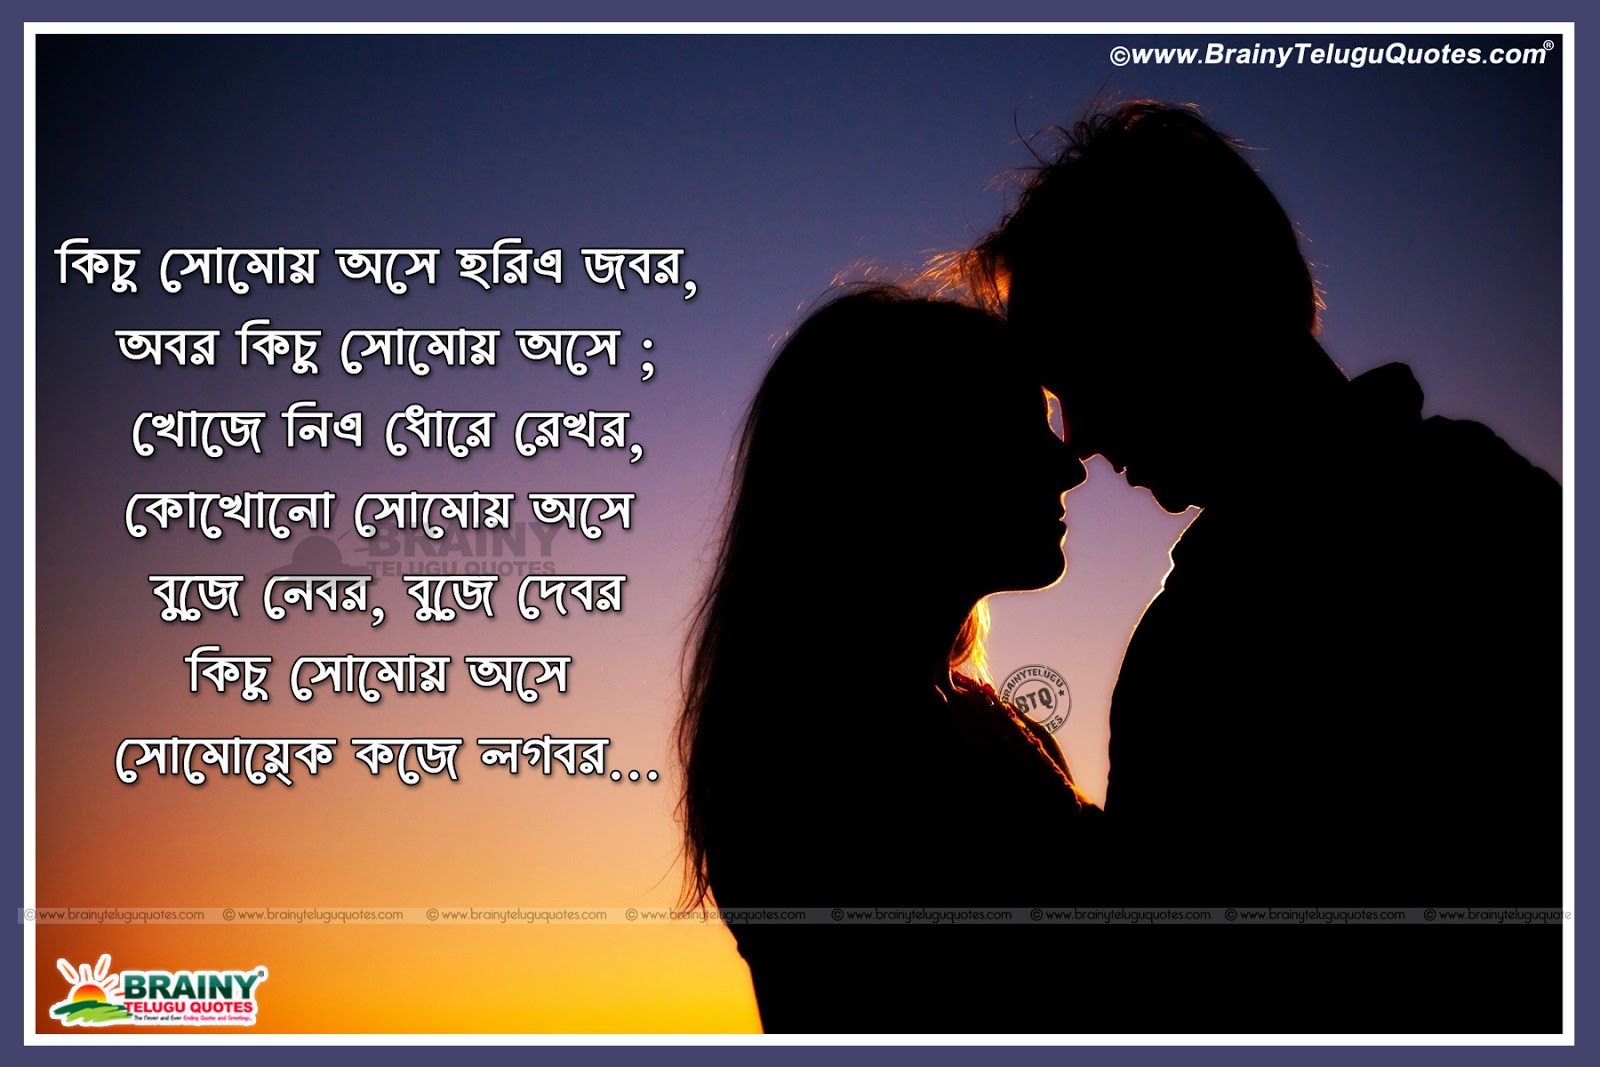 18 love quotes in bengali bengali love wallpapers love hd wallpapers